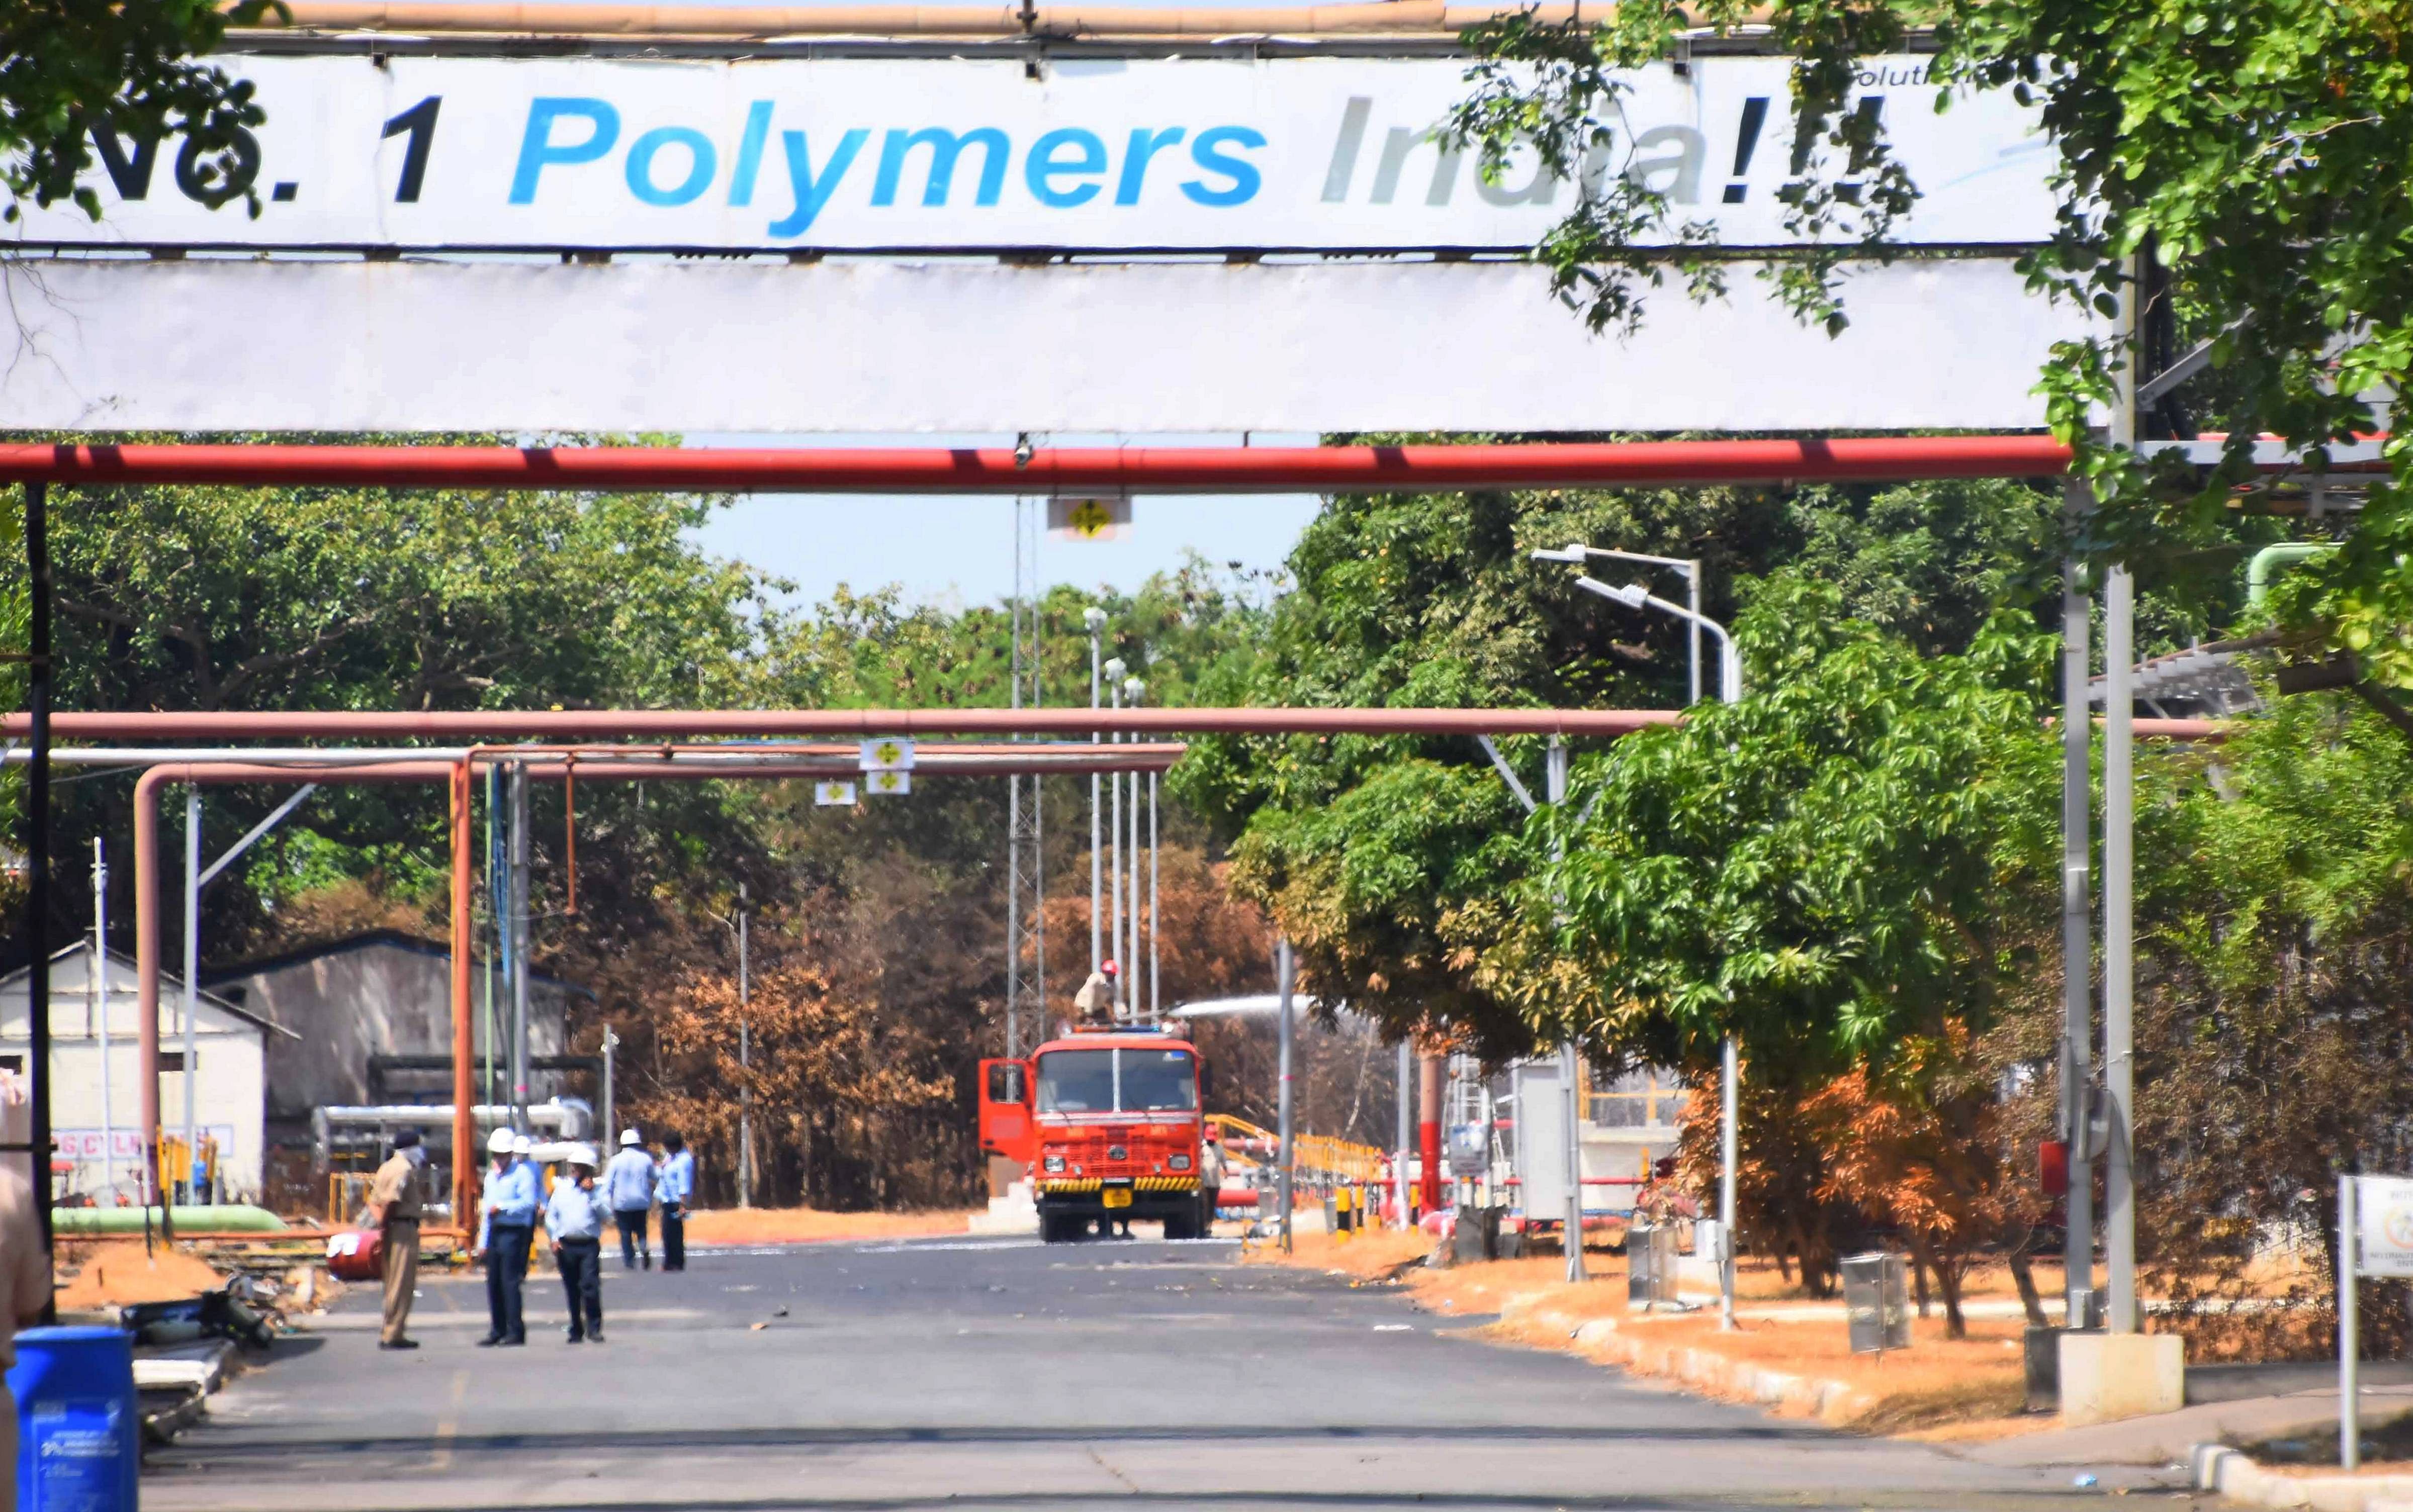  A view of the LG Polymers plant, a day after the major chemical gas leak incident, in RR Venkatapuram village in Visakhapatnam. (PTI Photo)